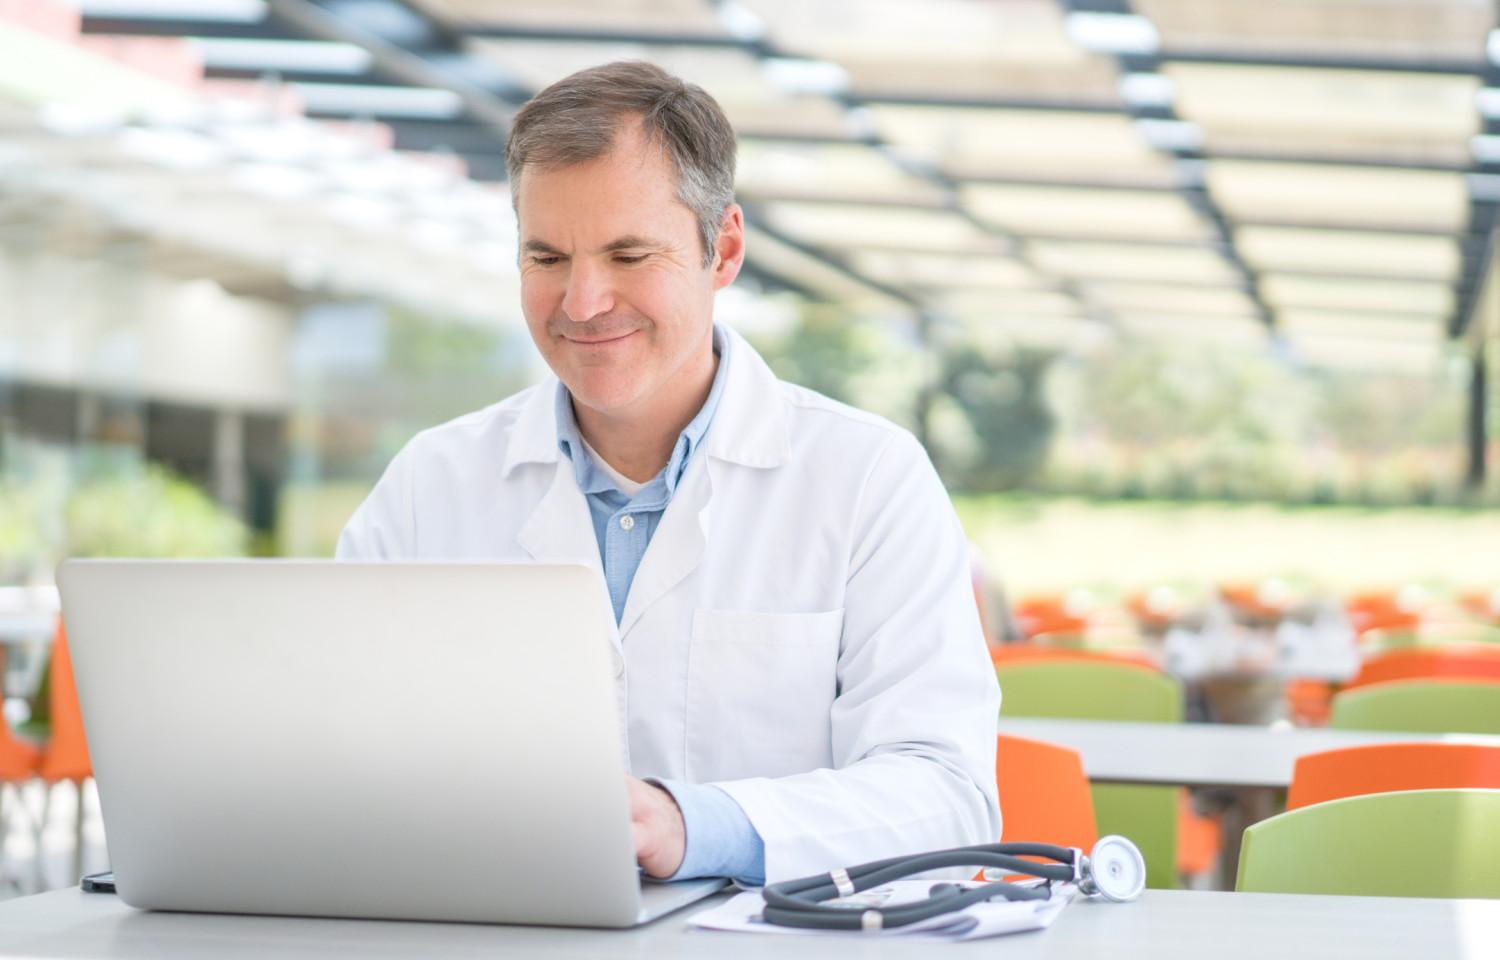 stock photo focused serious middle aged old male physician working with medical prescriptions and laptop busy
